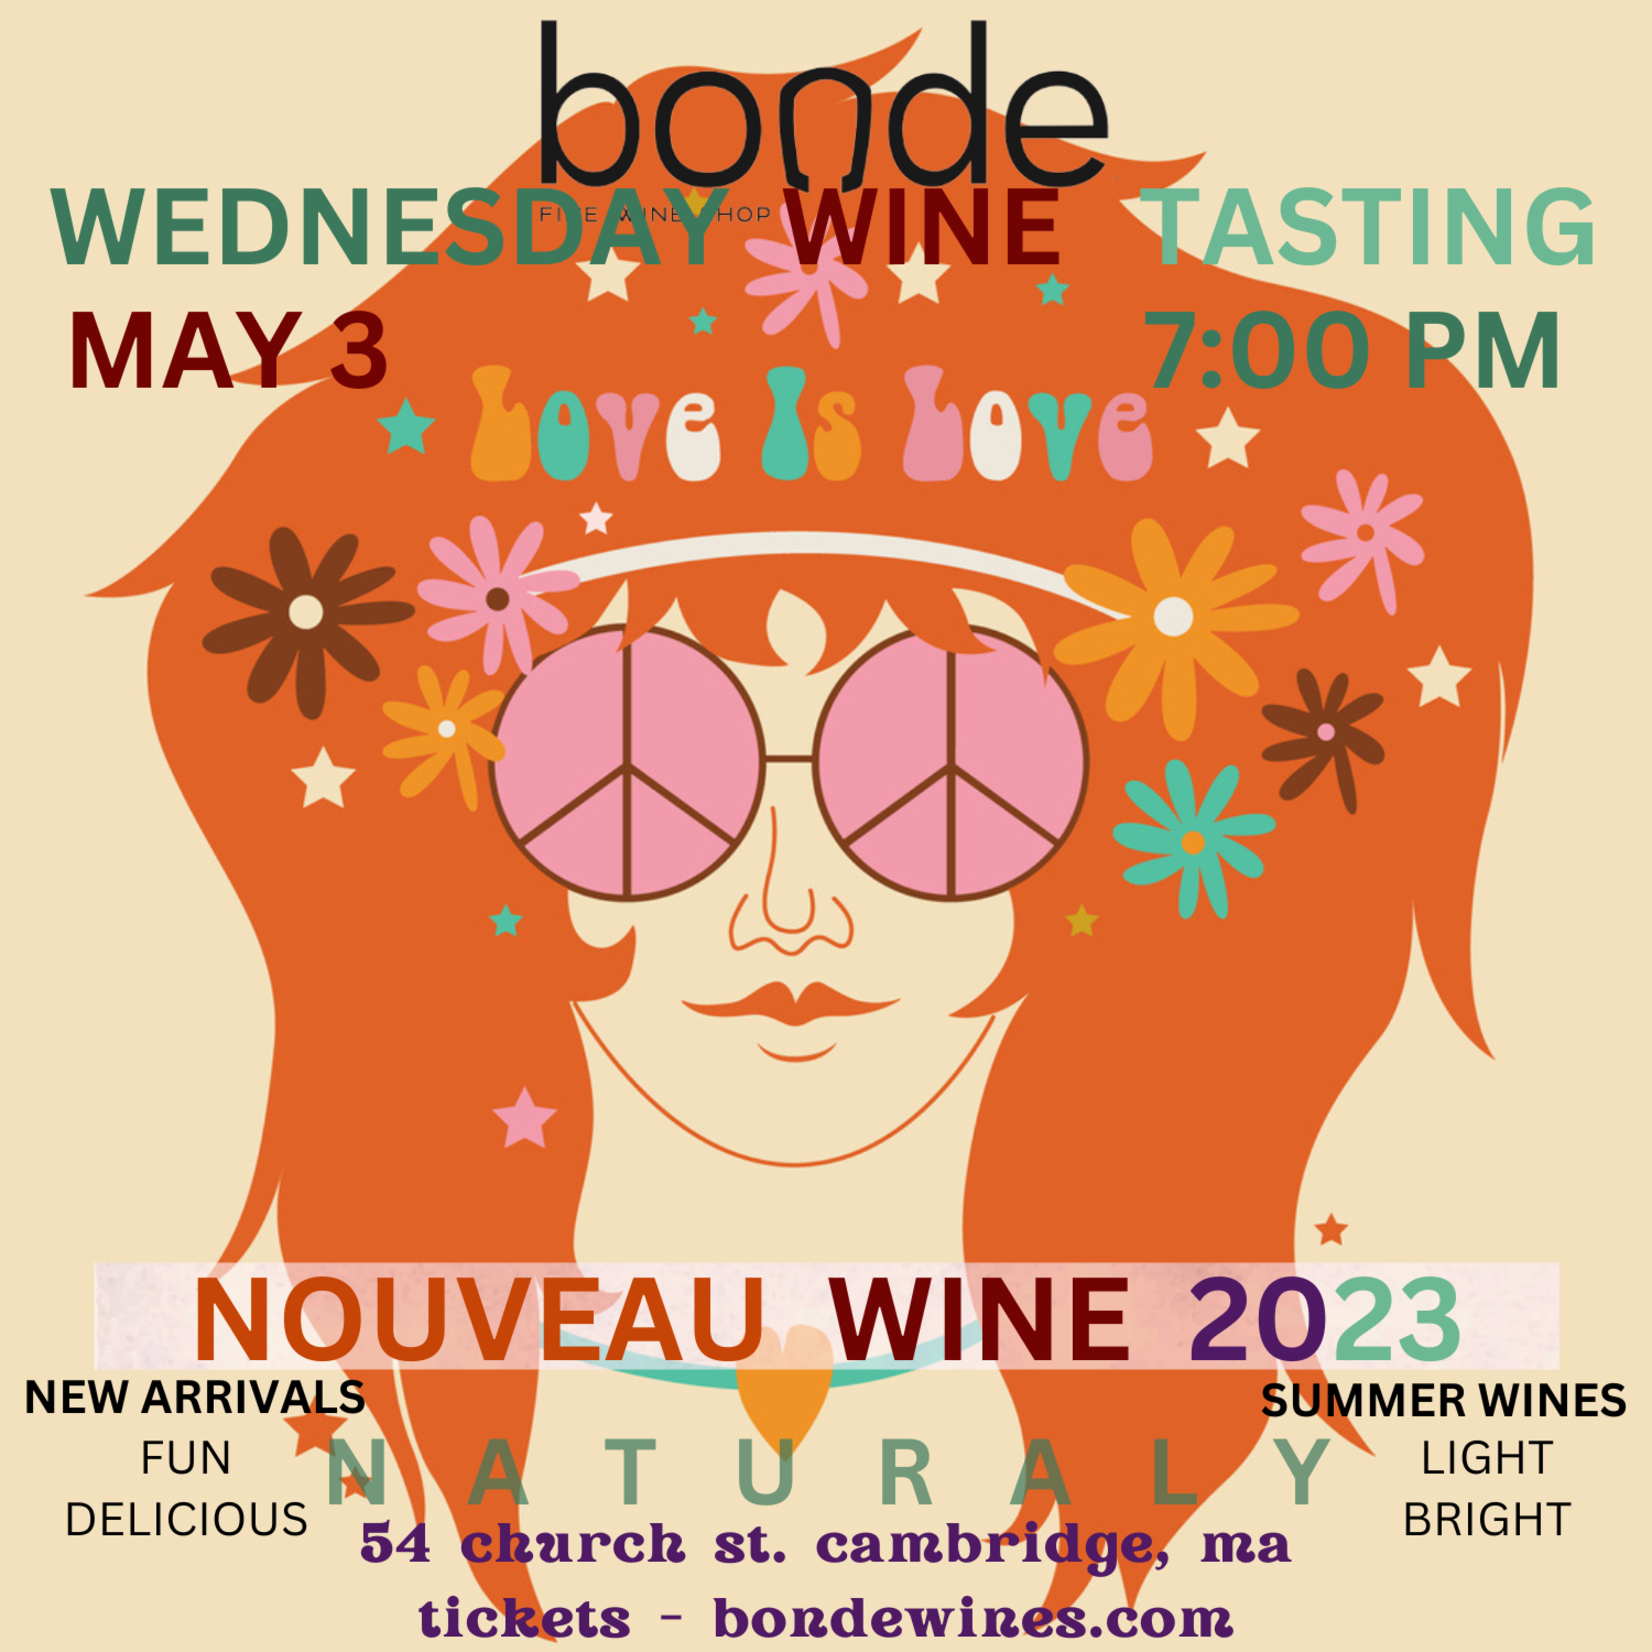 Nouveau Wines: Fun and Fresh - Wine Tasting & Class - Wednesday May 3, 7:00 p.m.